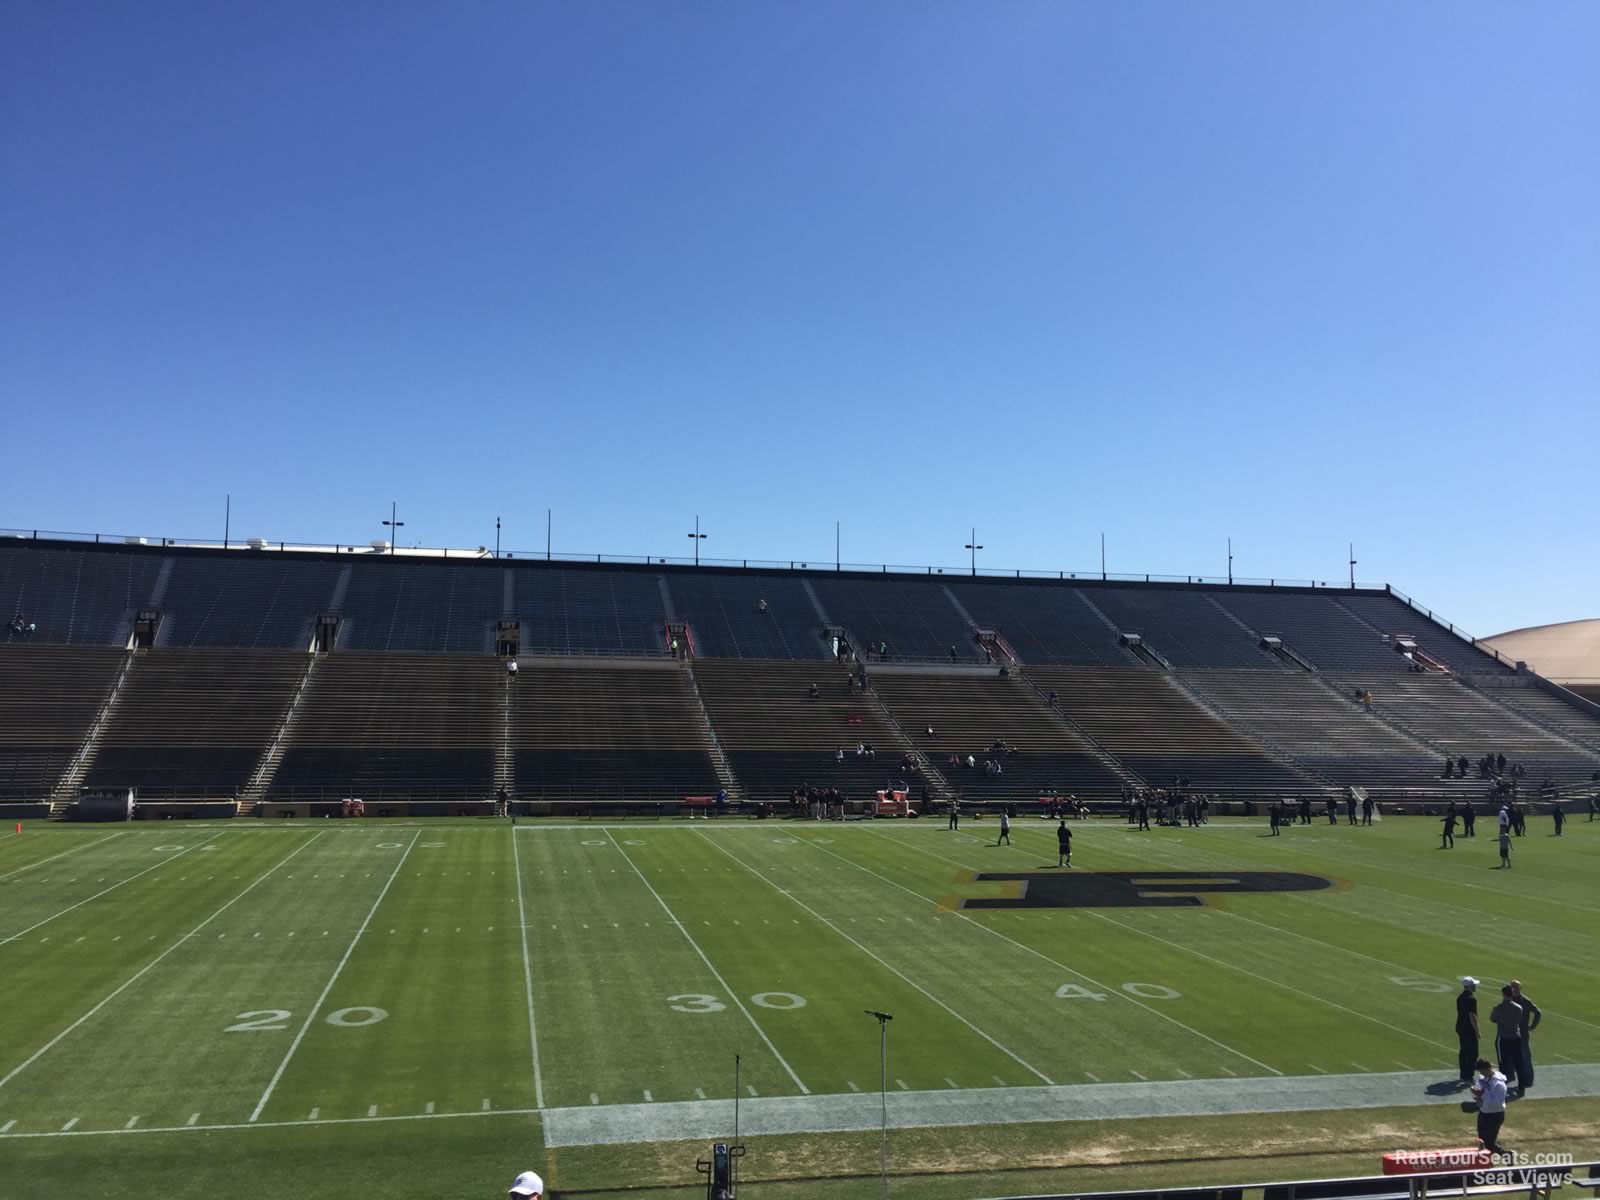 section 123, row 24 seat view  - ross-ade stadium